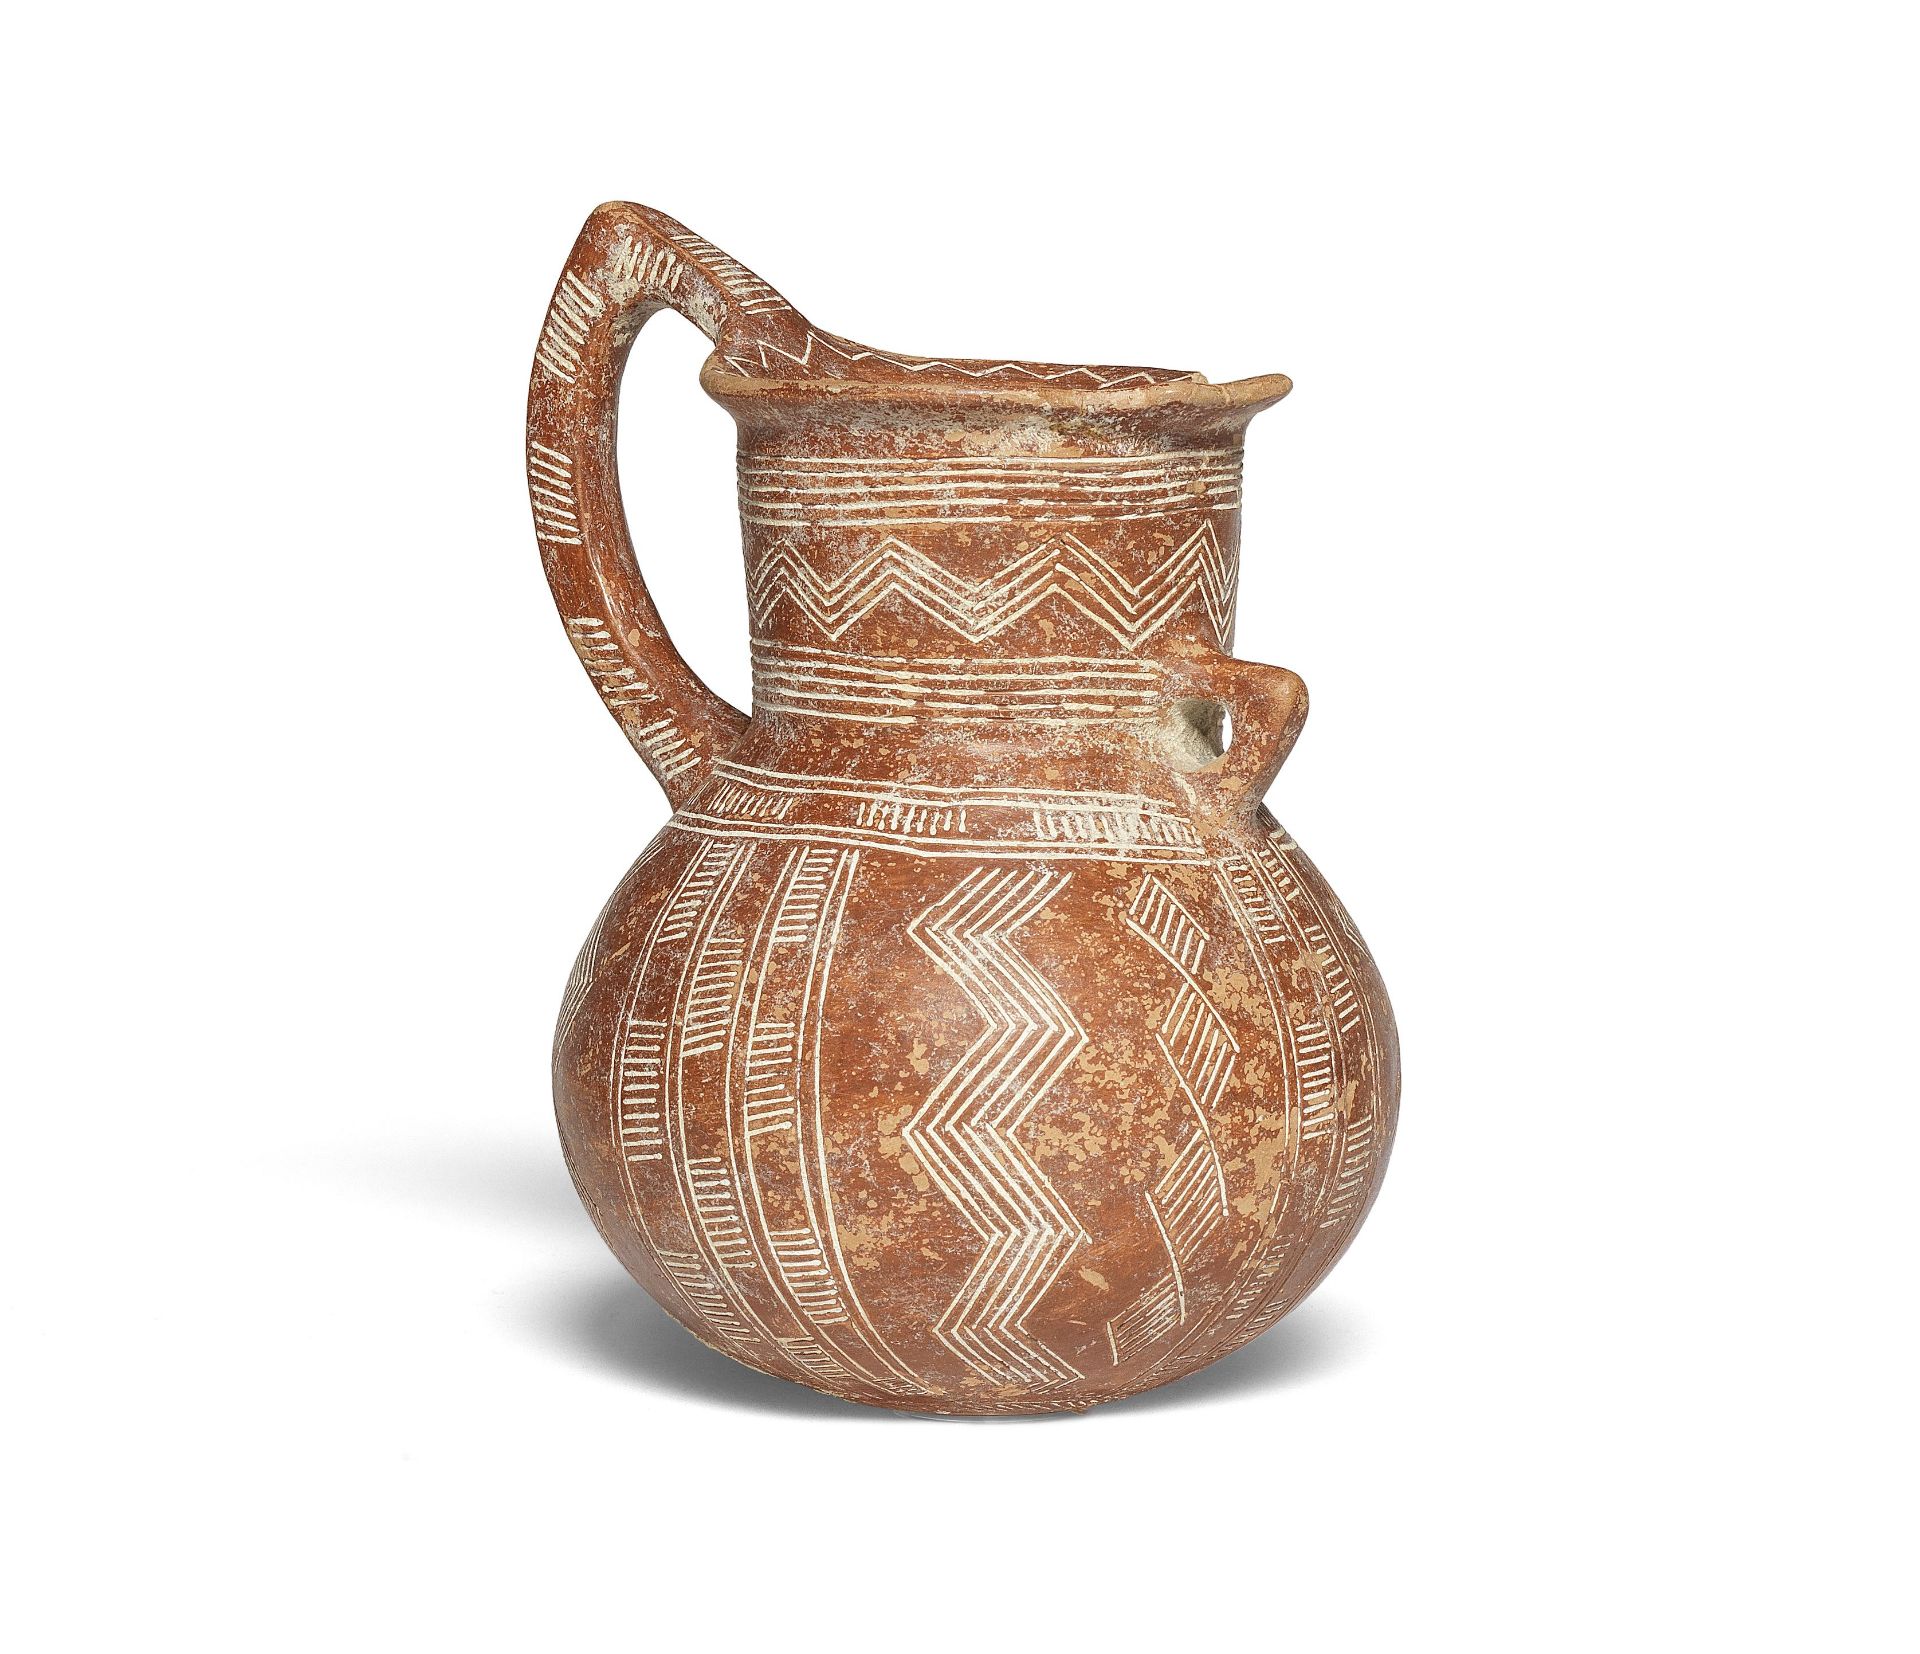 A Cypriot incised red polished ware jug